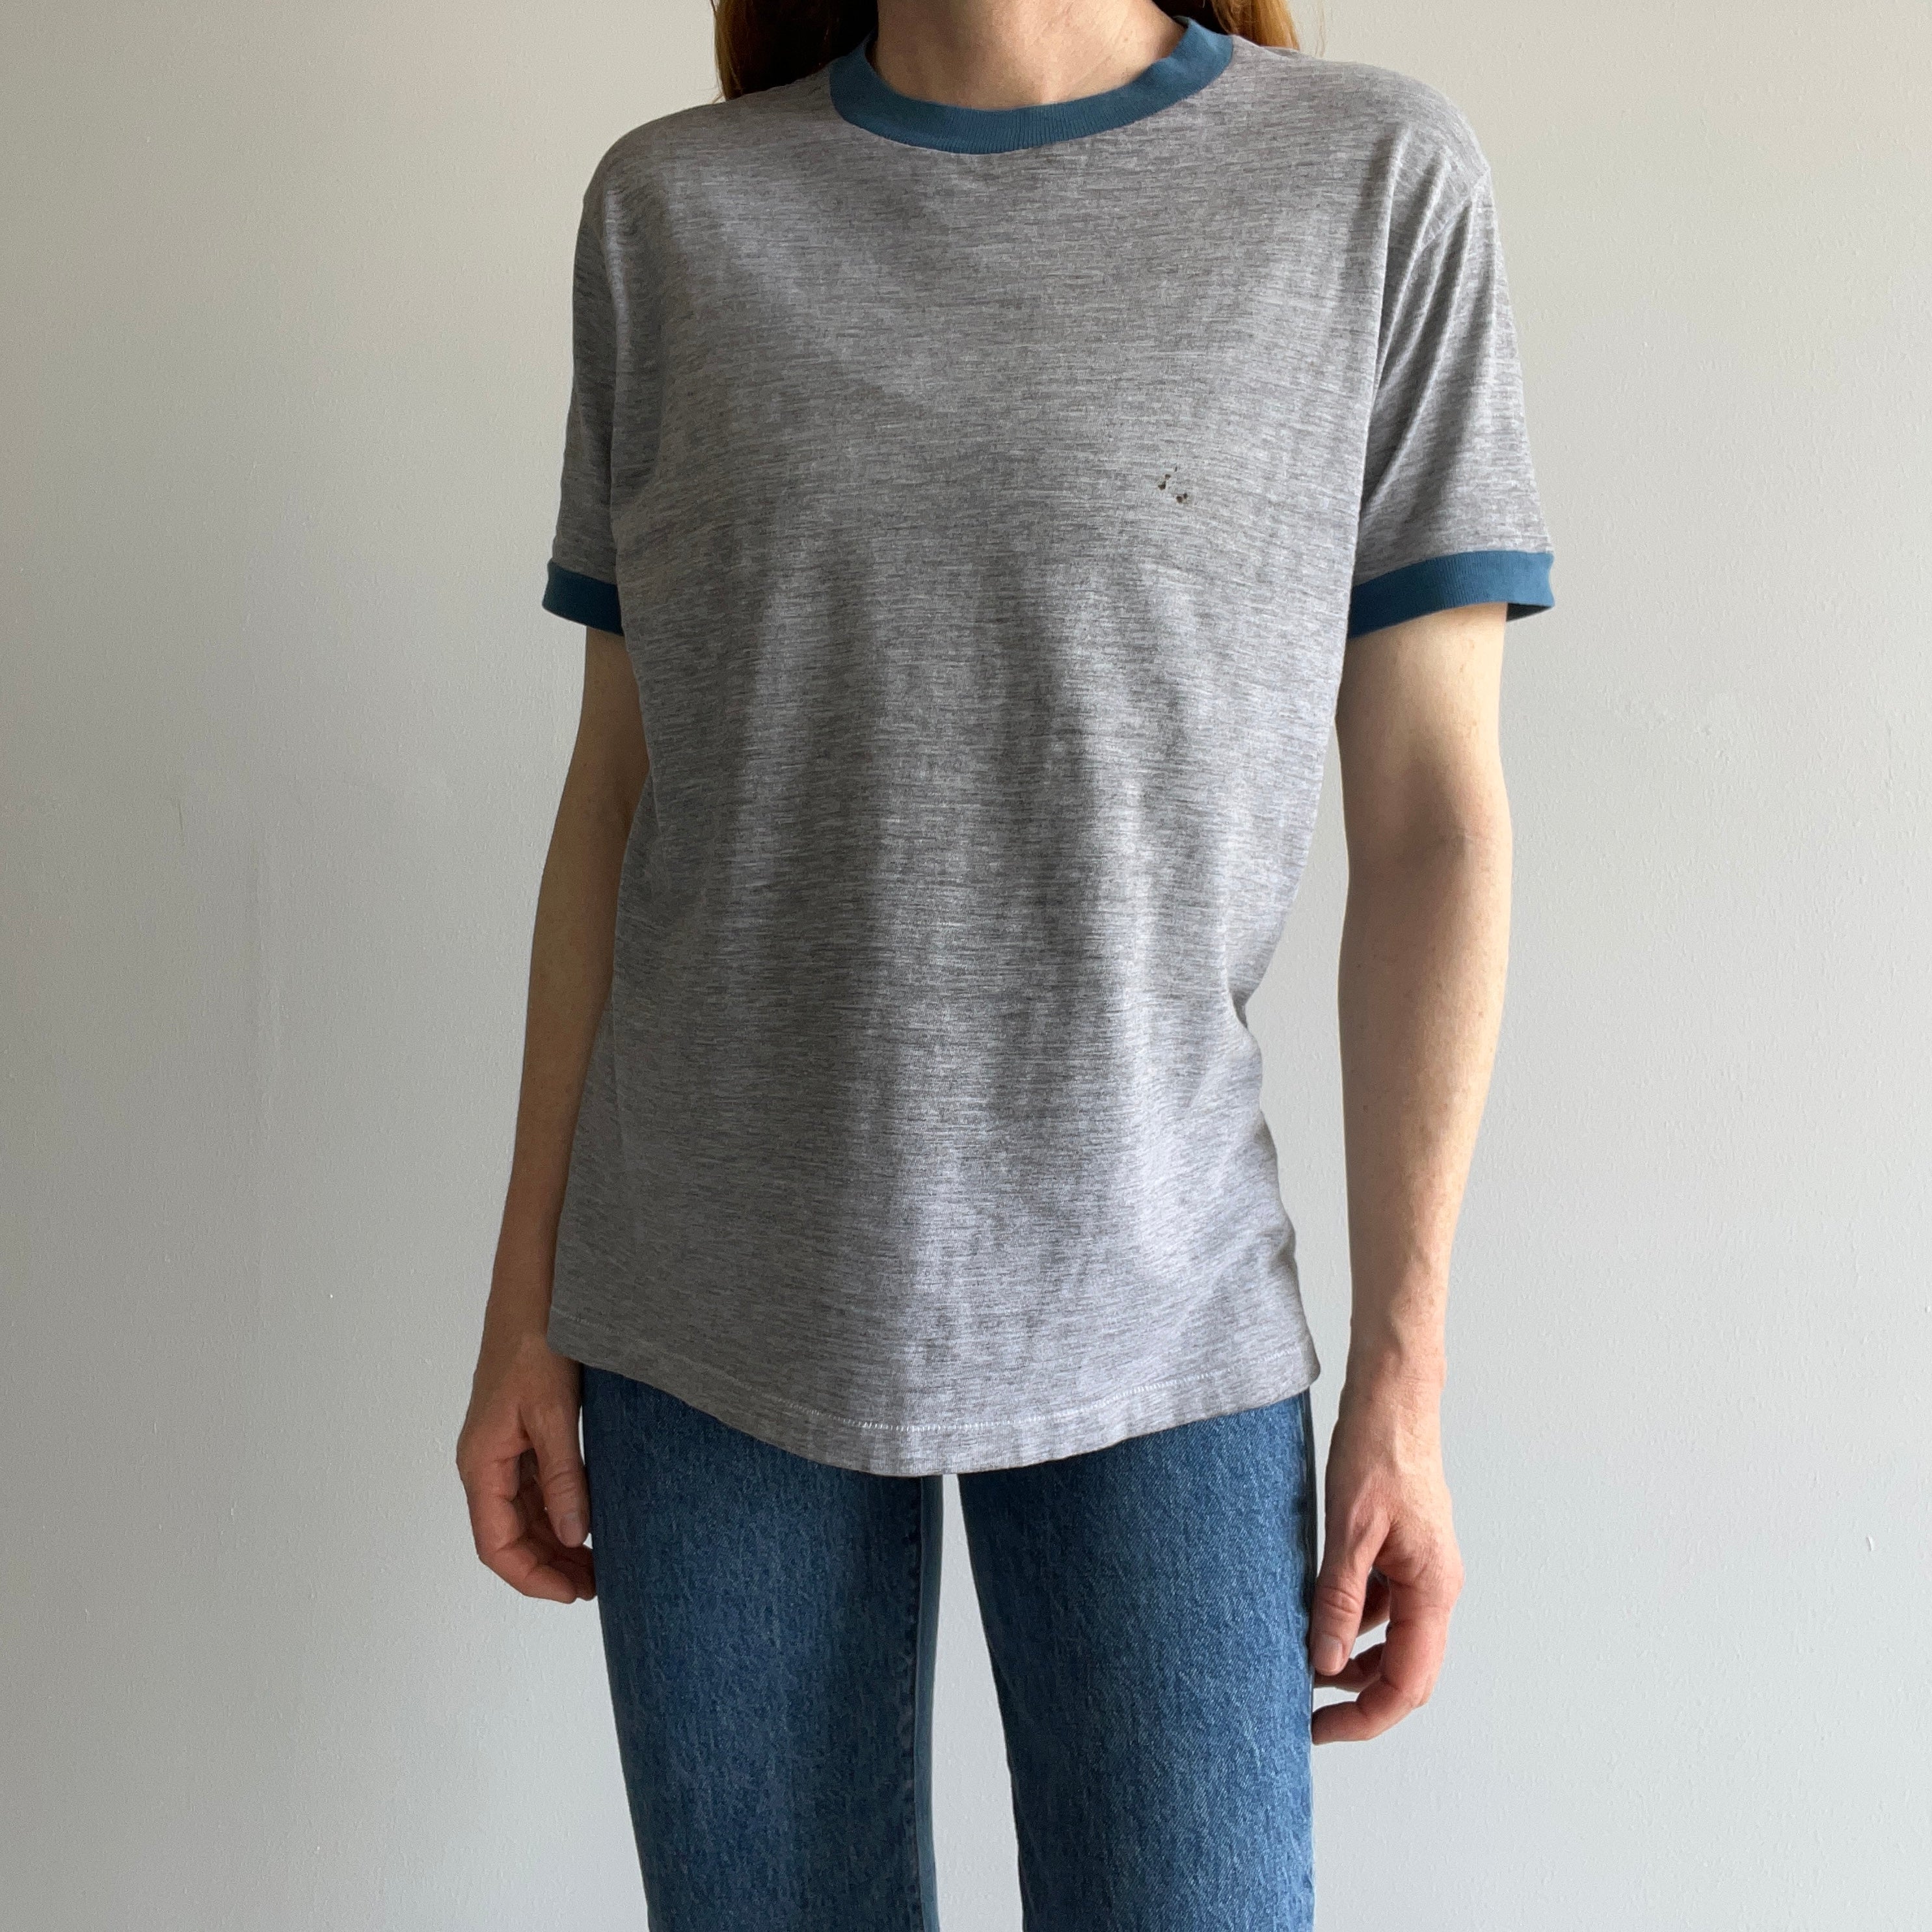 1970/80s Two Tone Gray and Blue Ring T-Shirt (Single Stitch and Worn)